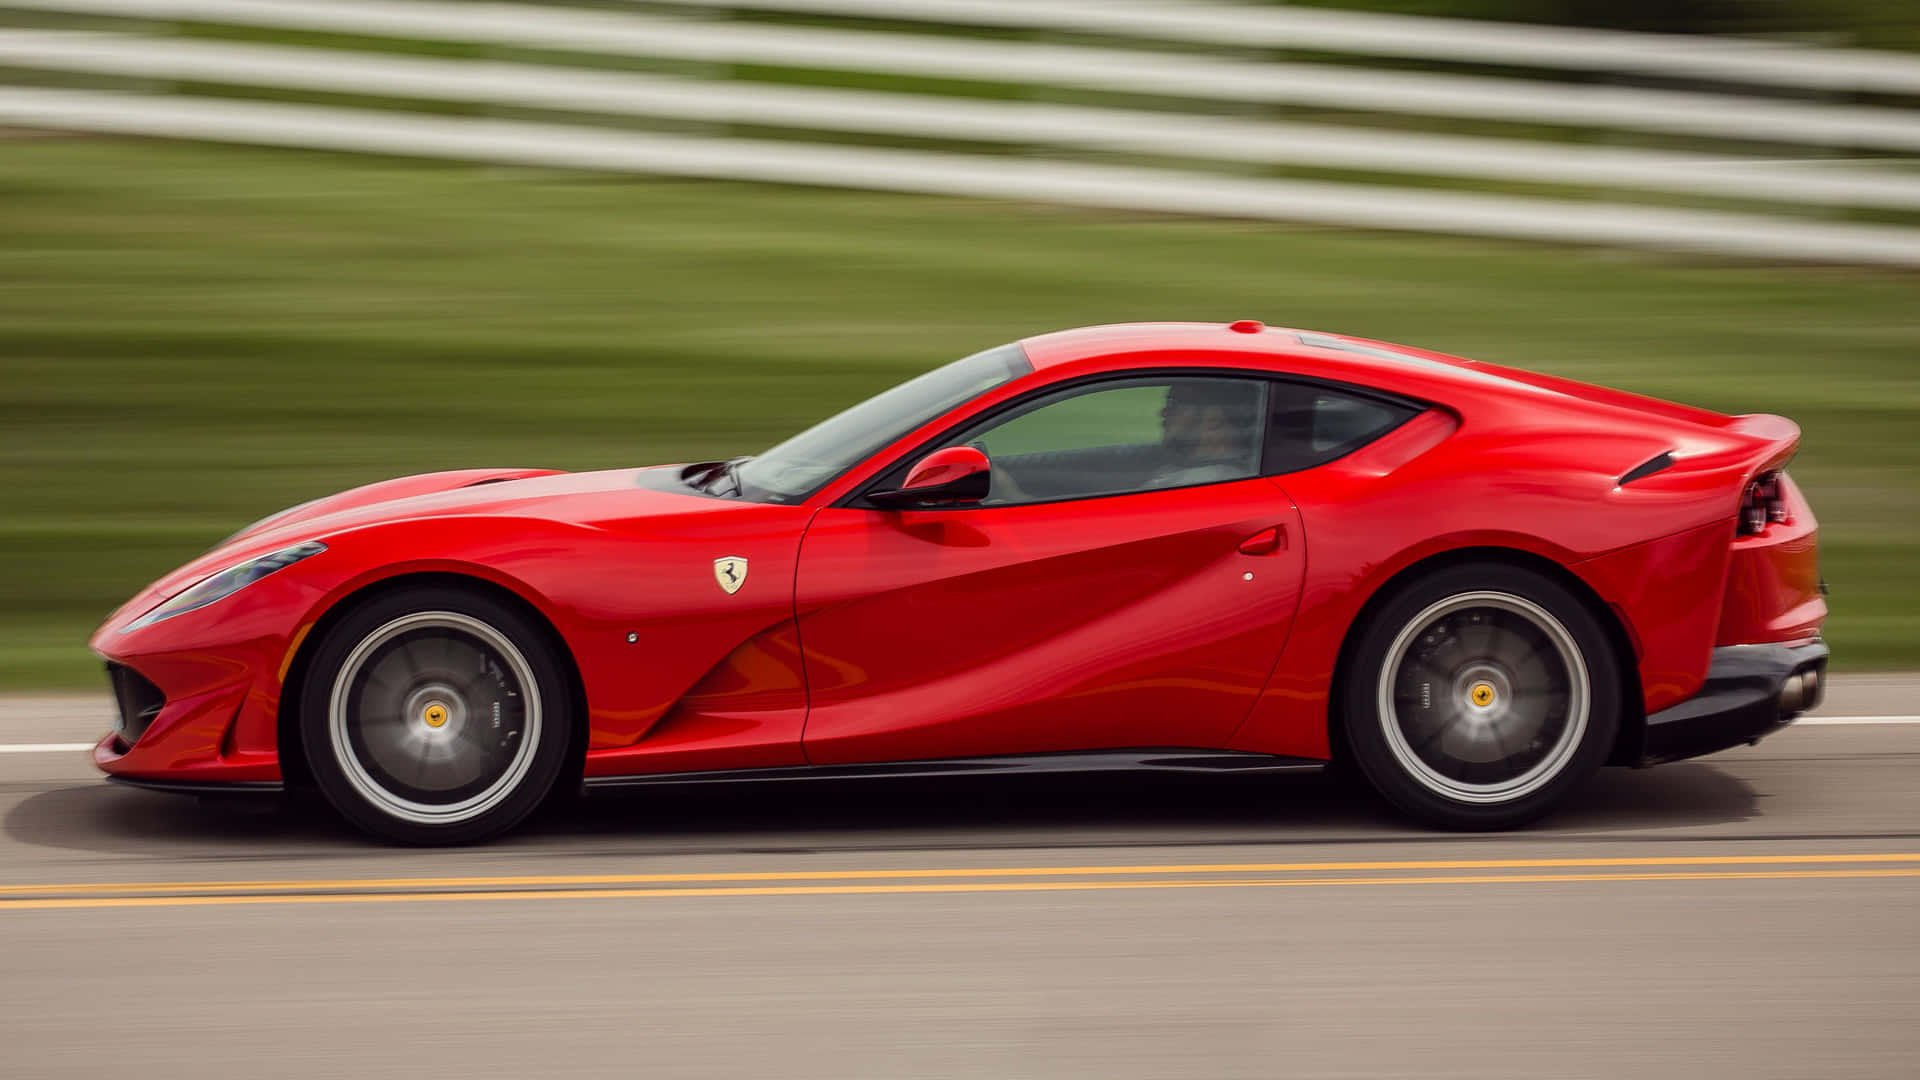 A stunning and powerful Ferrari 812 Superfast in action Wallpaper